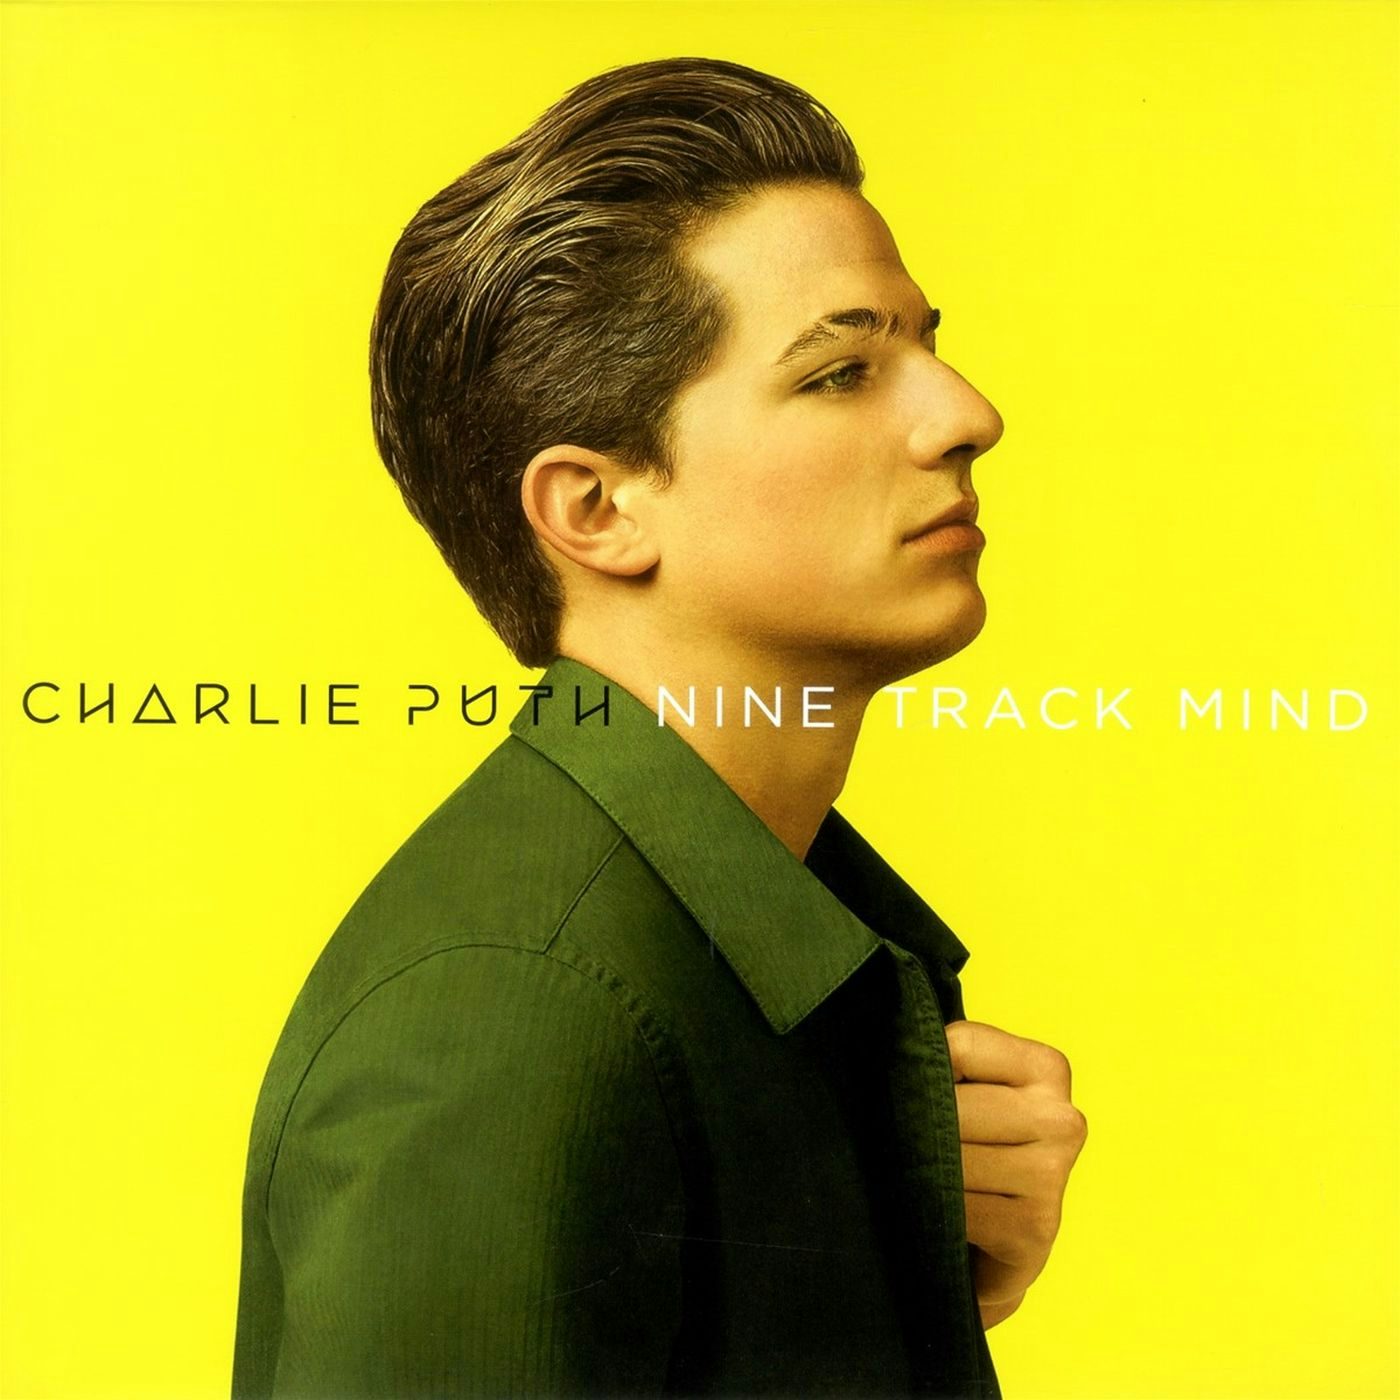 LIMITED EDITION Vinyl Record - Charlie Puth